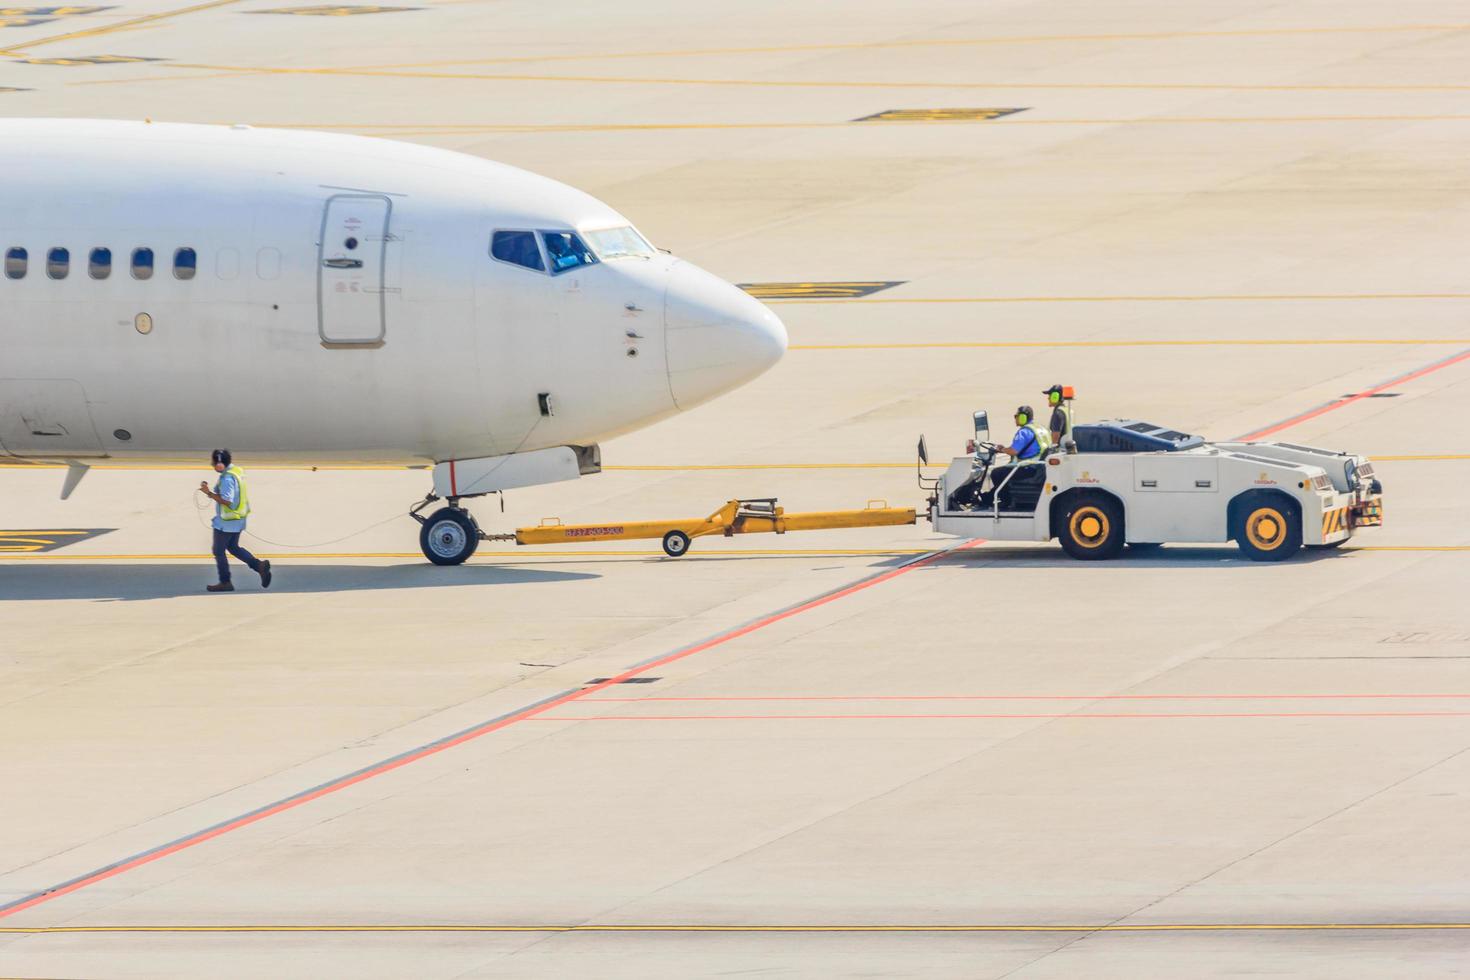 Airplane tow truck towing aircraft on the runway photo